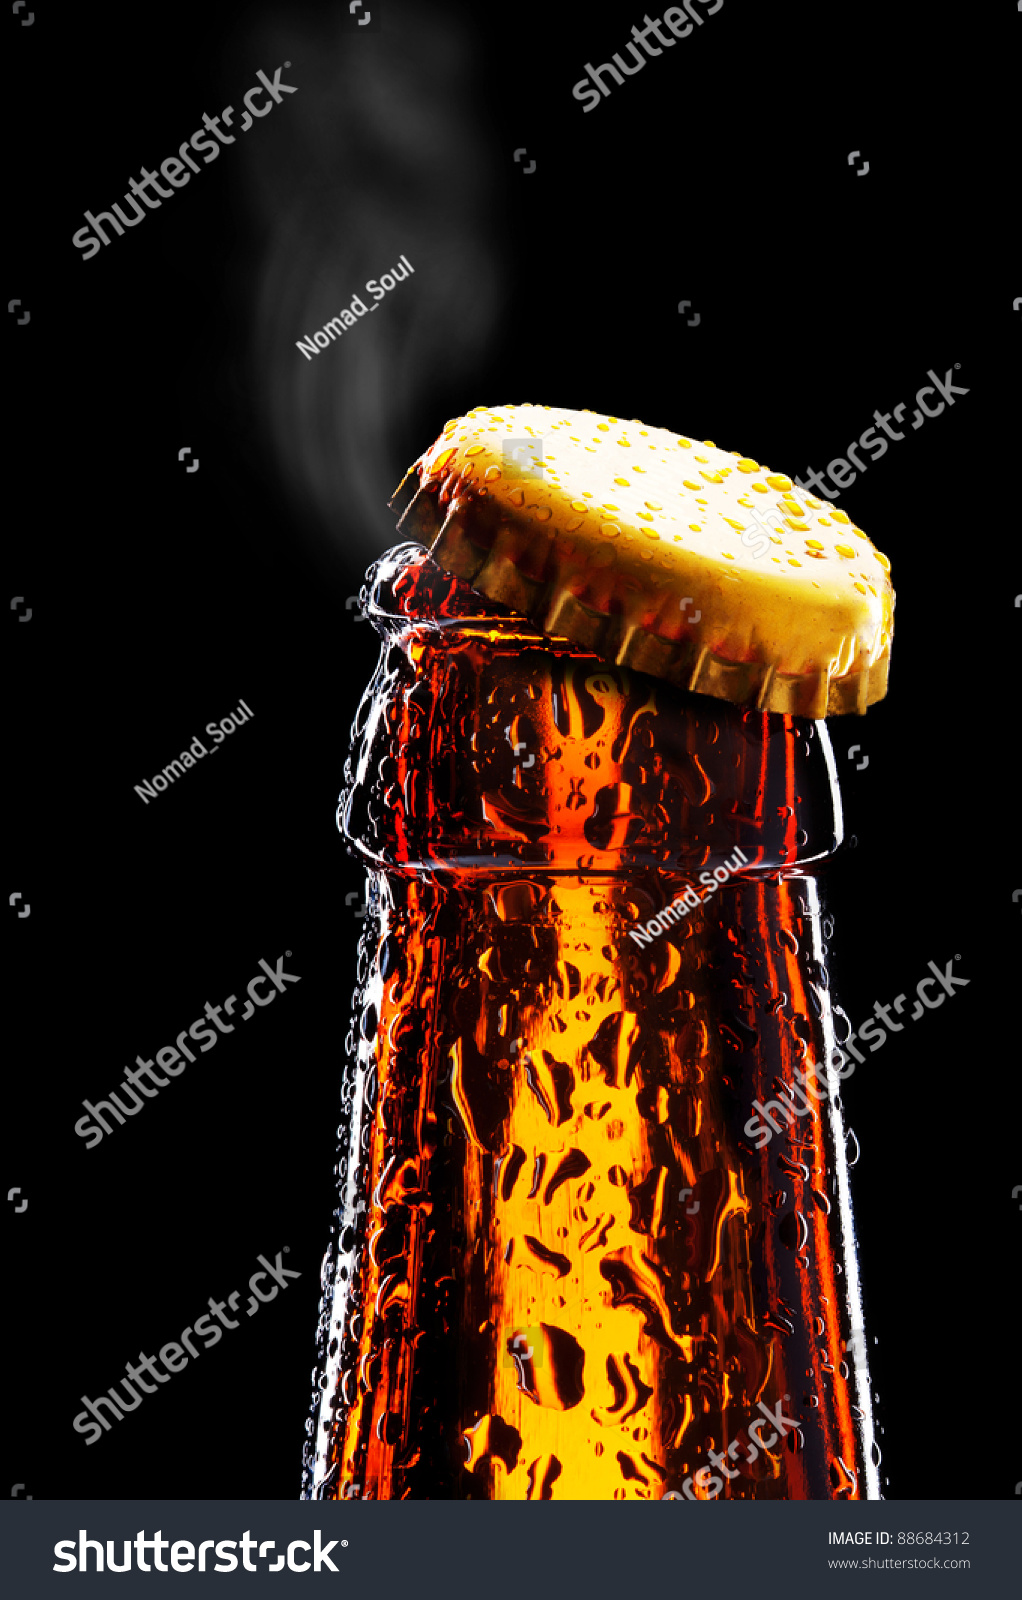 Top Of Open Wet Beer Bottle Isolated On Black Stock Photo ...